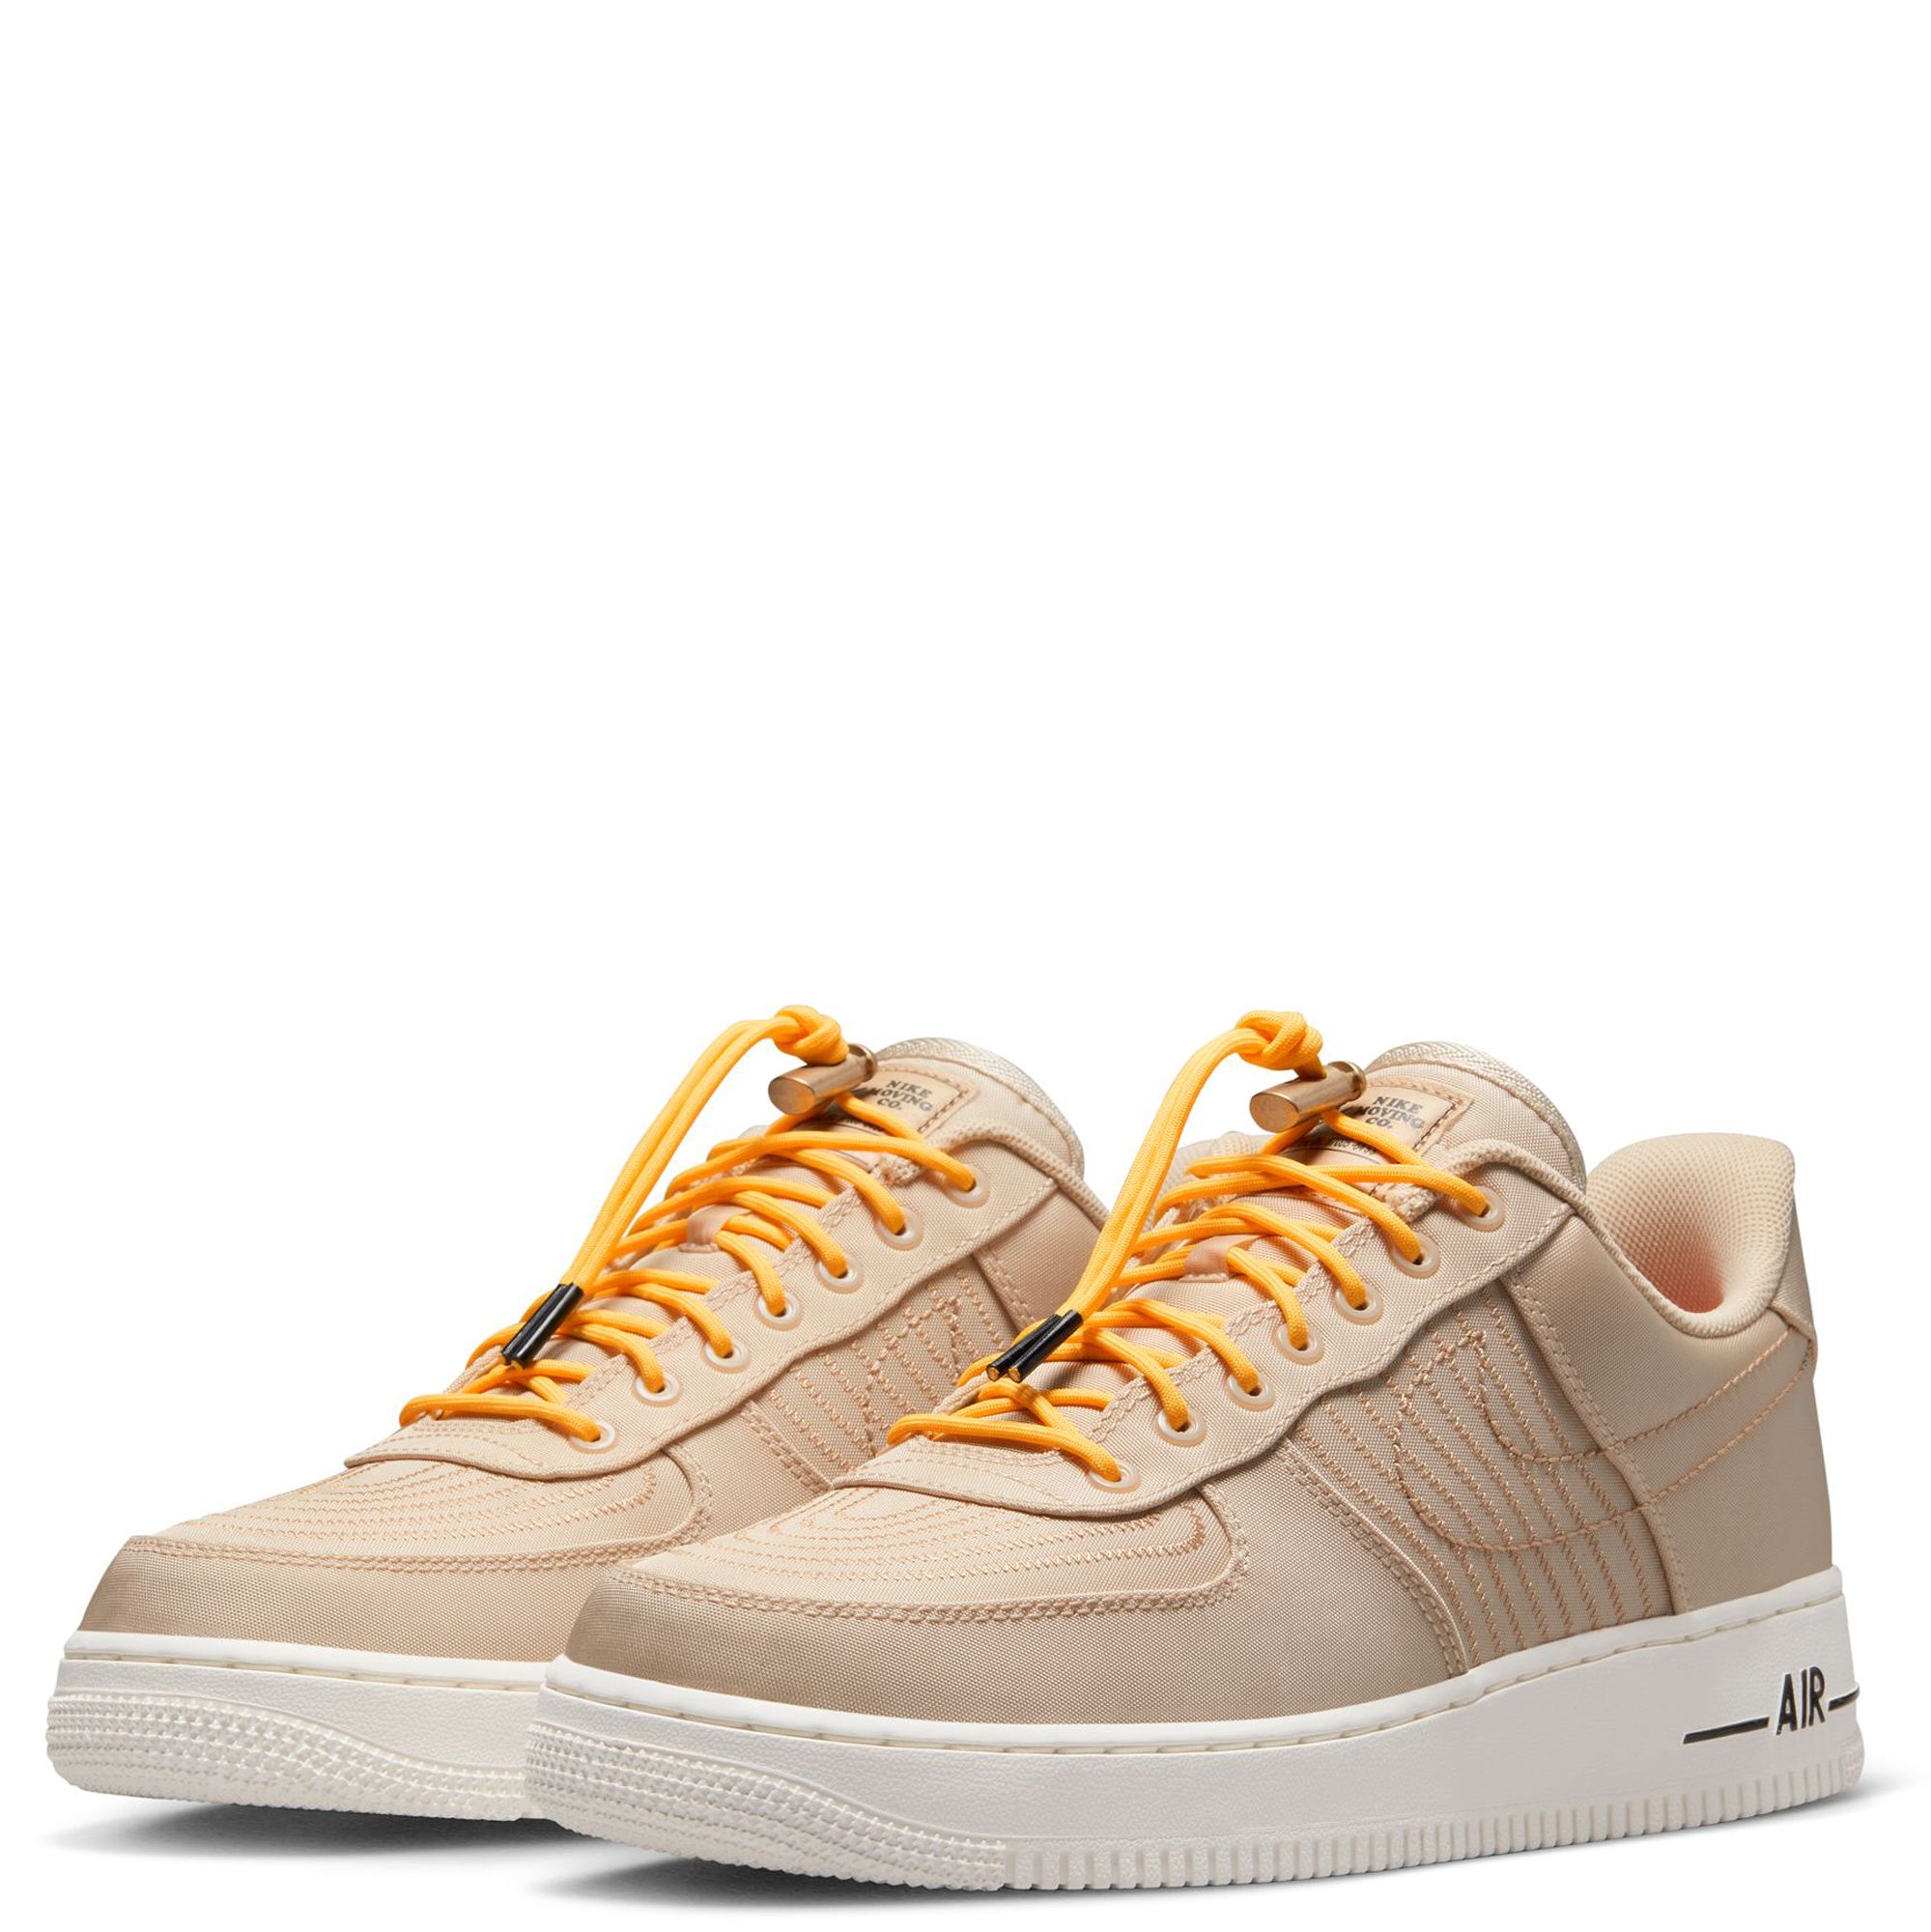 Nike Air Force 1 Low Moving Company DV0794-100 Release Date